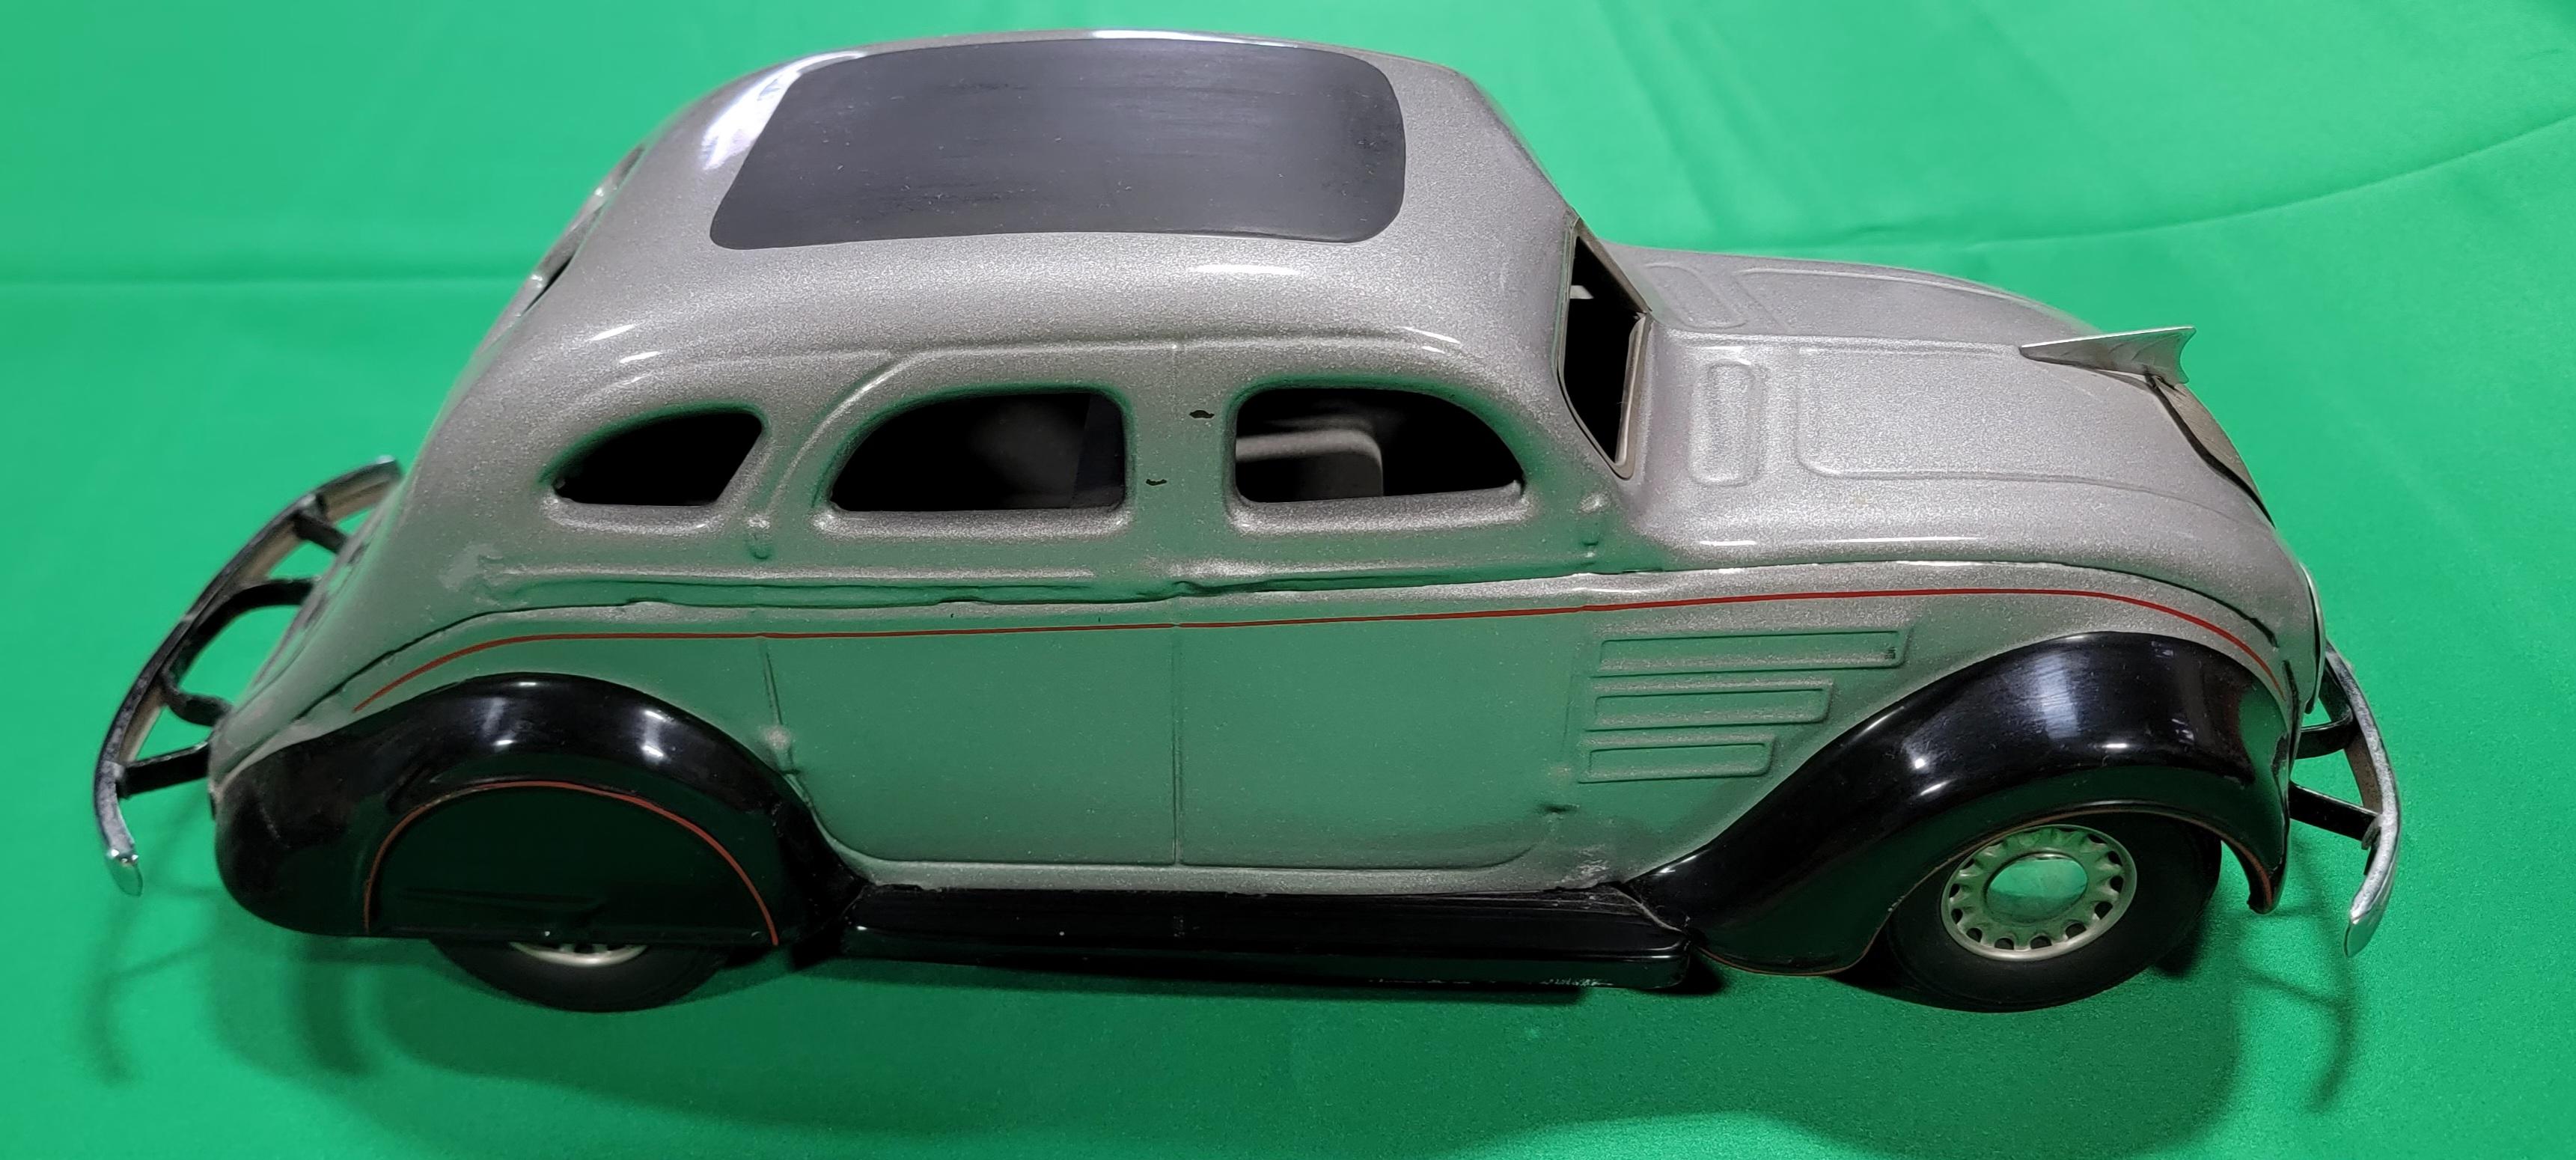 Restored 1934 Chrysler Airflow toy car by Cor-Cor. The Cor-Cor toy company or Corcoran Metal Produts was located in Washington, Indiana (USA) and was in business from 1925-1941. 